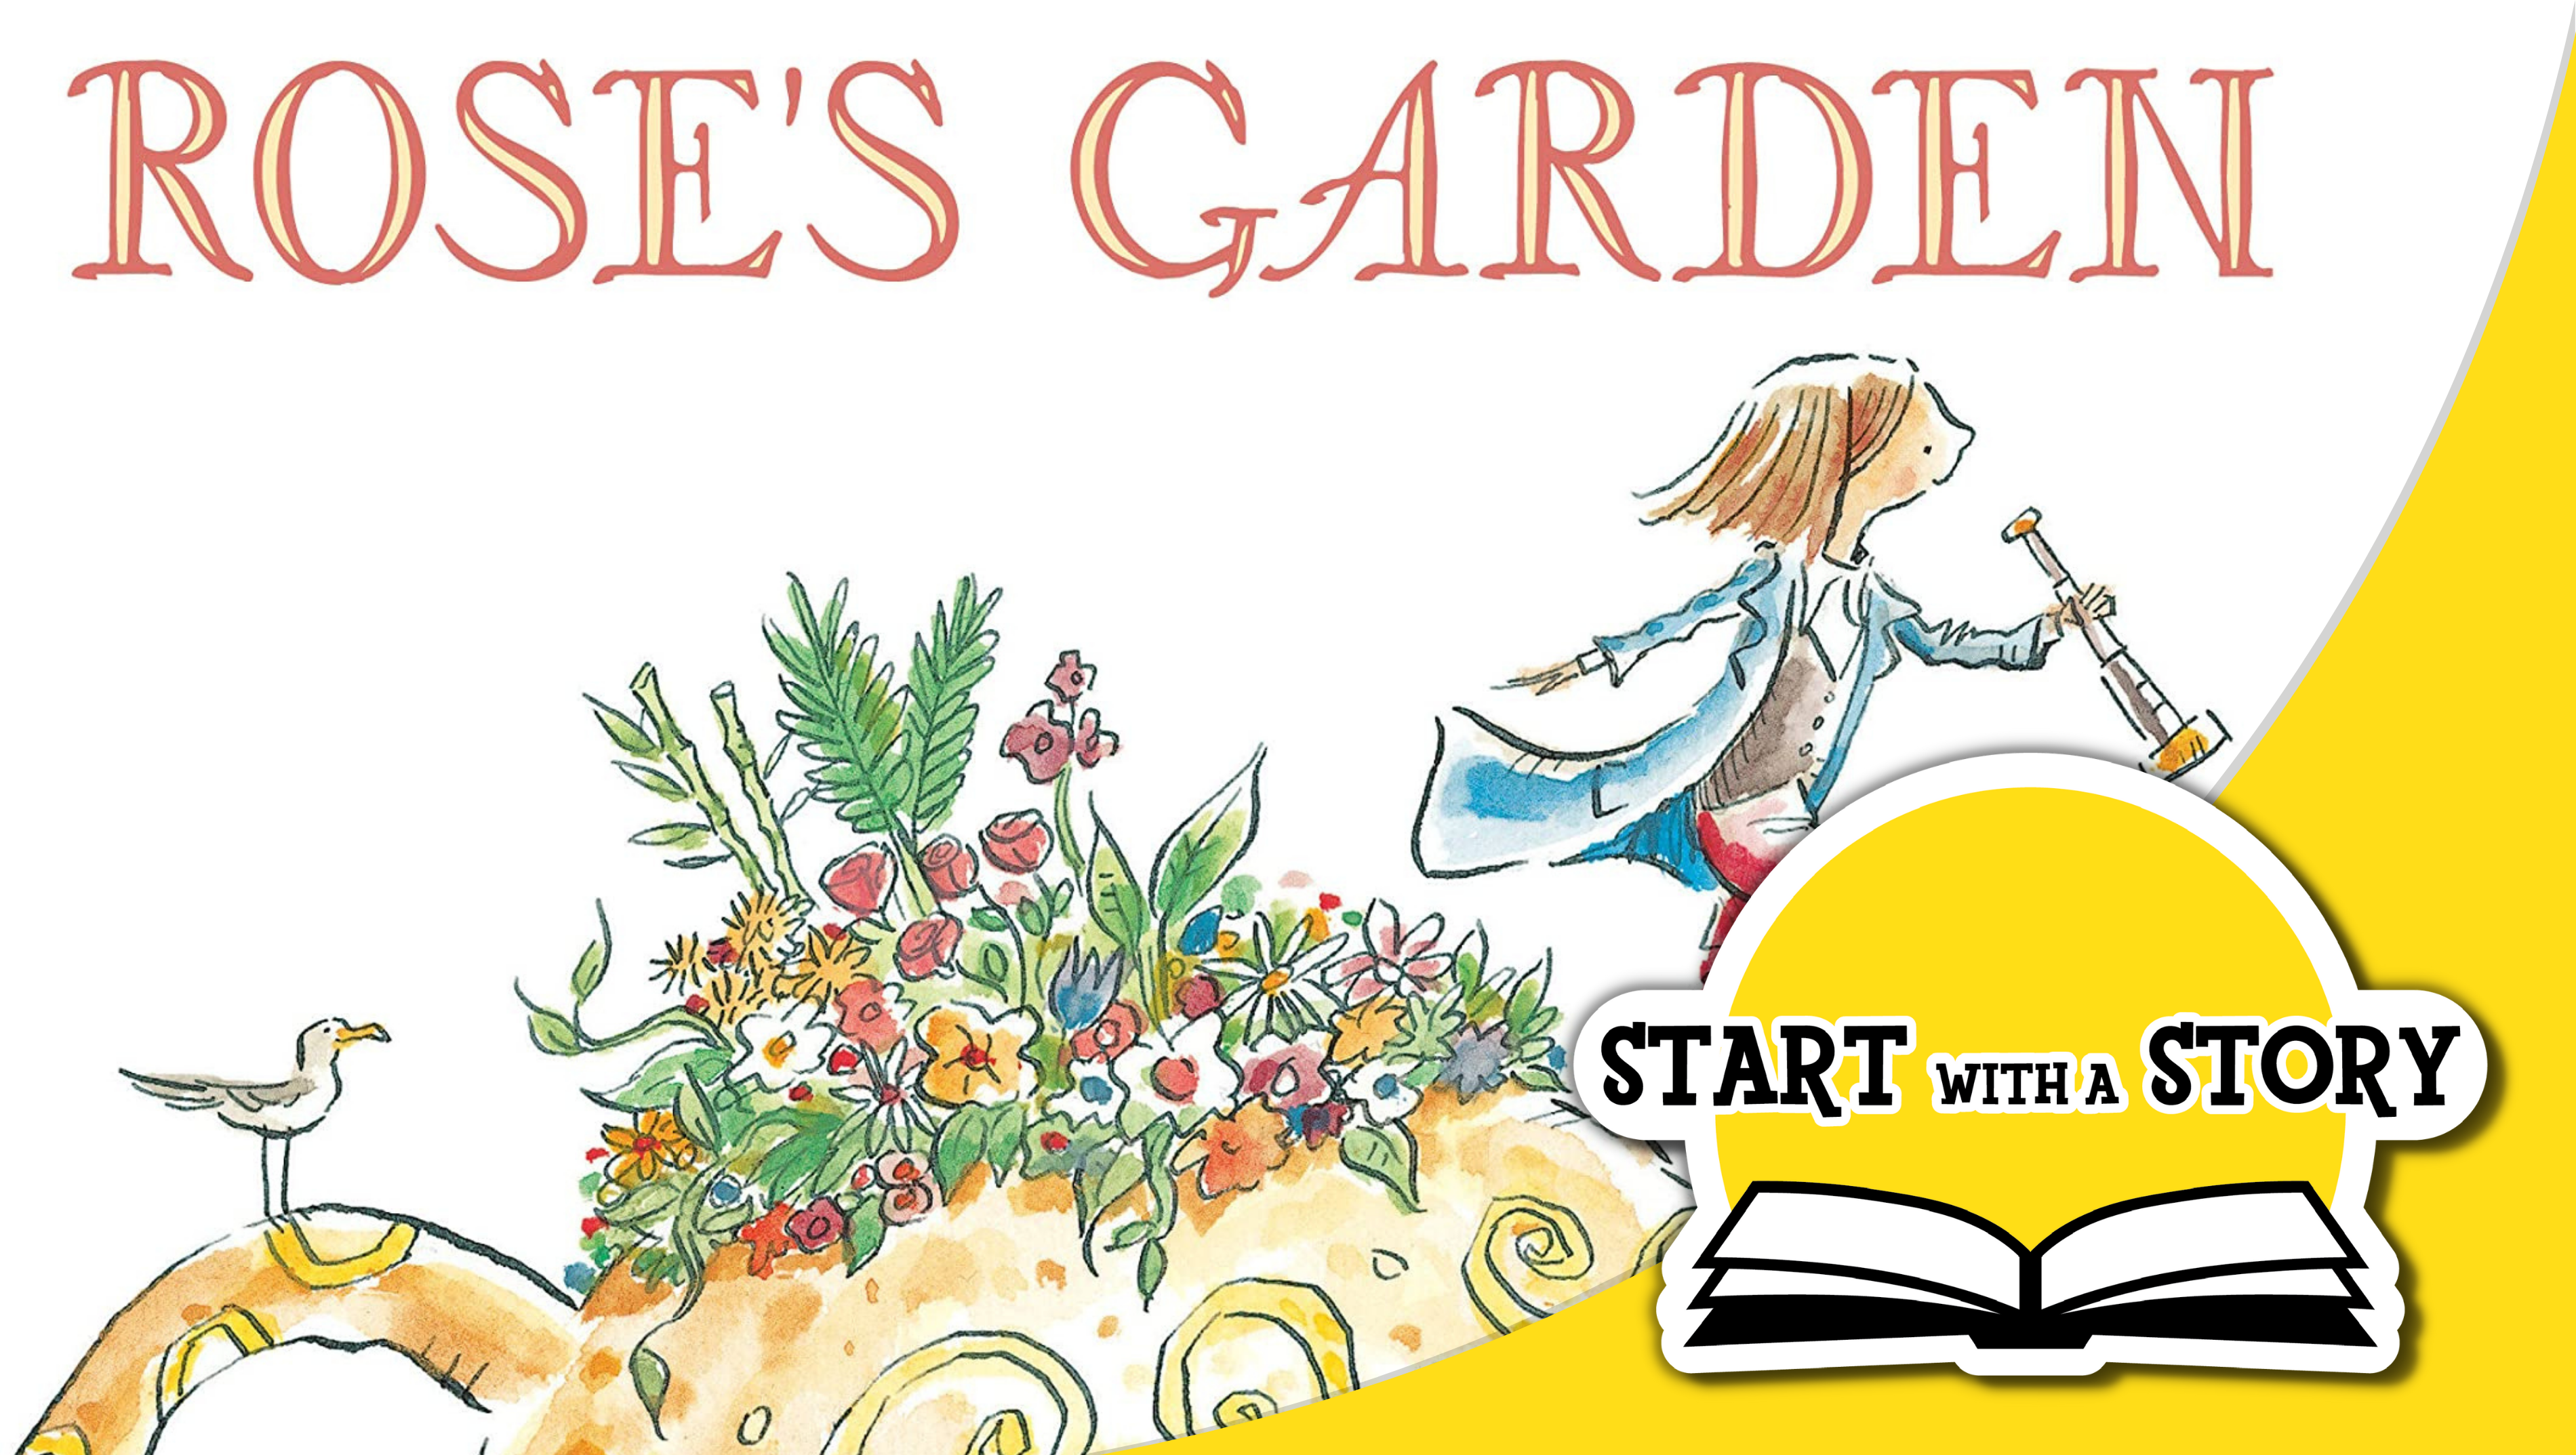 Start with a Story Roses Garden Overview